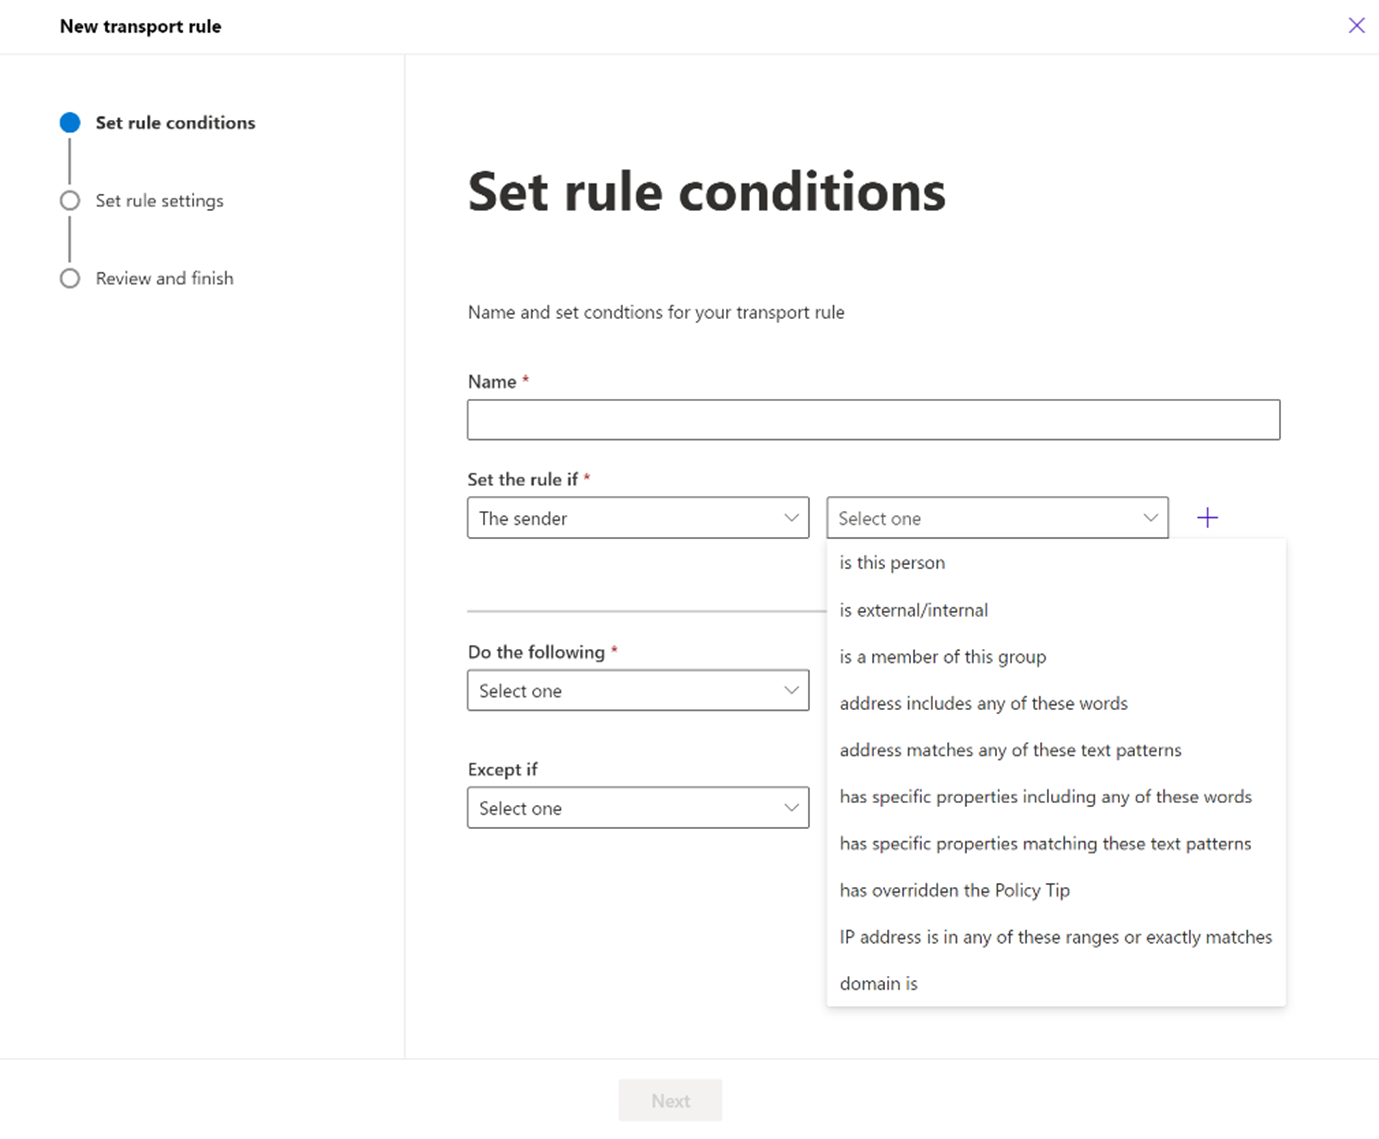 The screenshot that shows the Set rule conditions page.